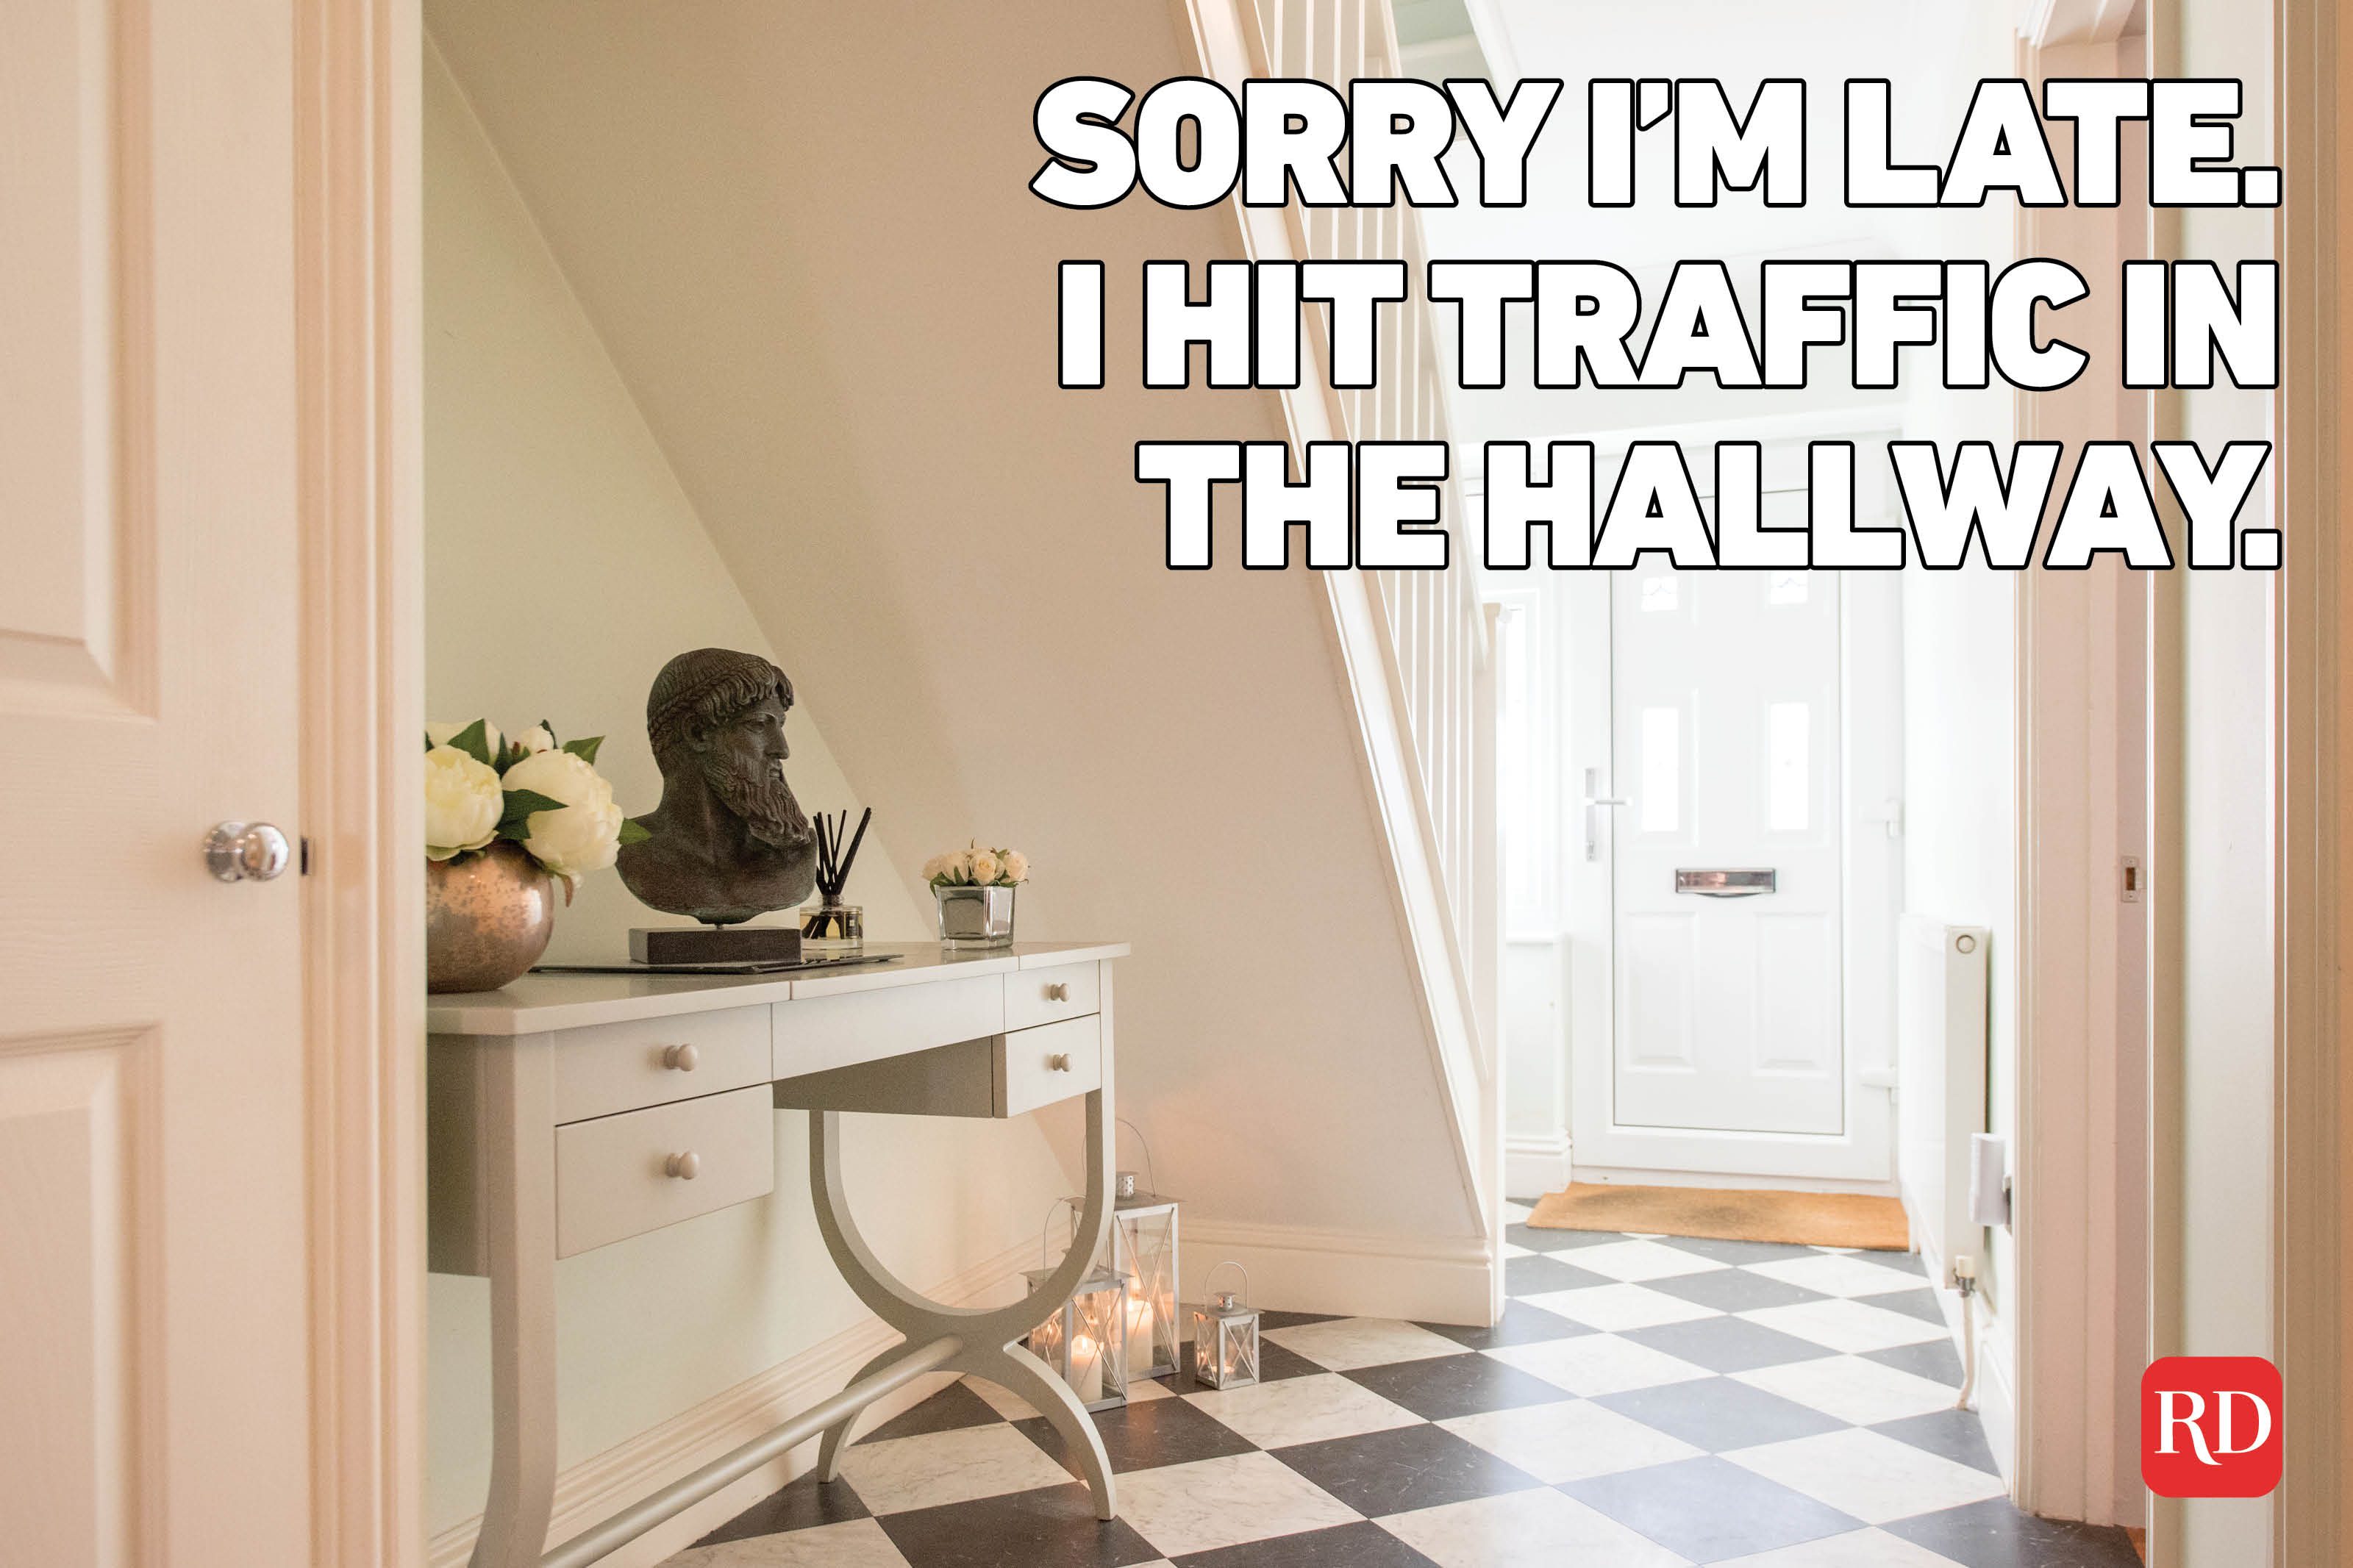 Working from Home Memes That Are Hilariously Accurate